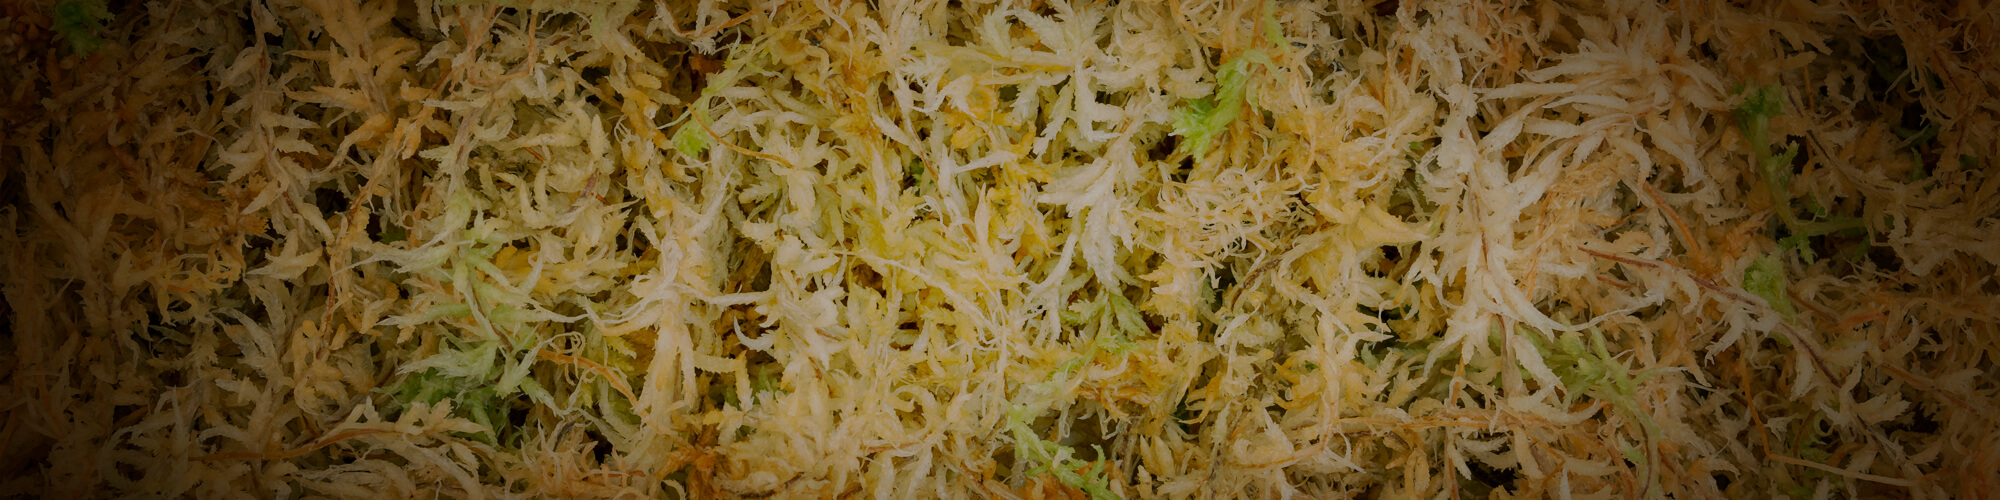 download sphagnum moss for free